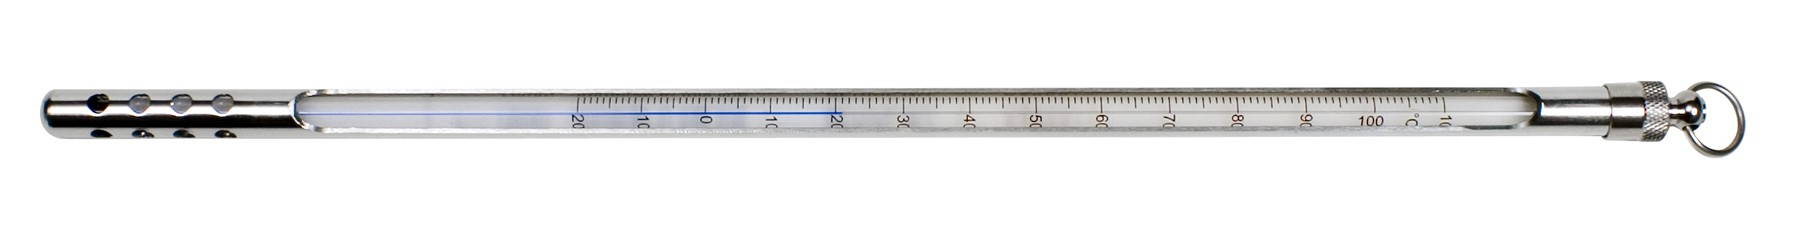 H-B DURAC Plus Armored Liquid-In-Glass Thermometer; -10 to 260C, 76mm Immersion, Organic Liquid Fill